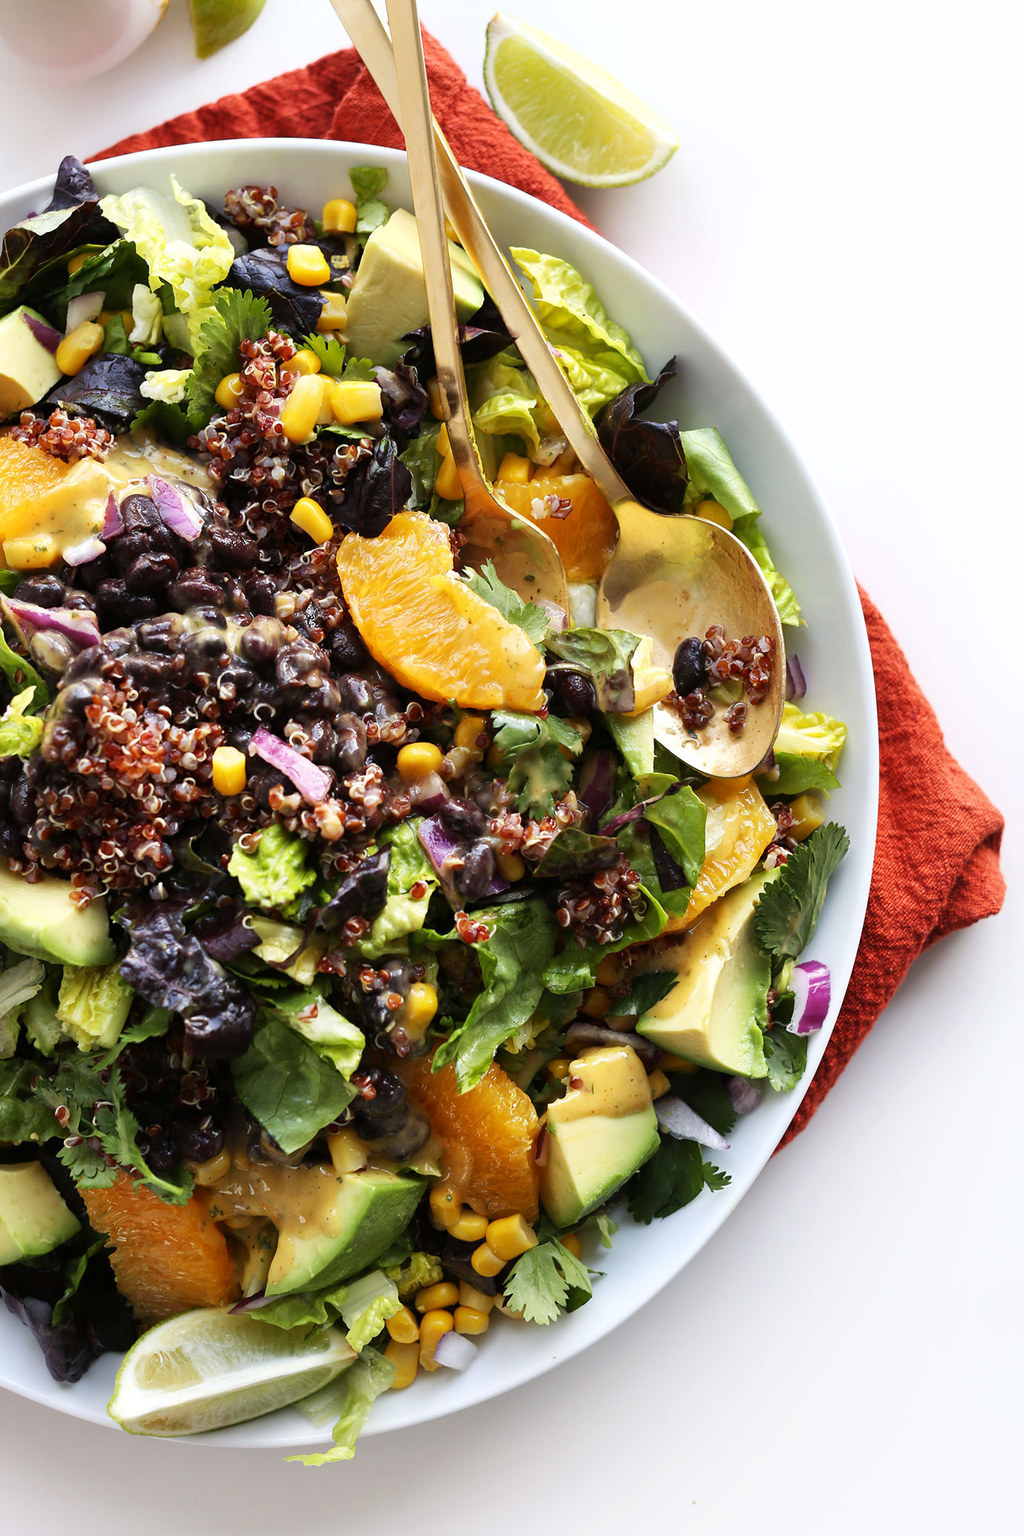 25 MeatFree Clean Eating Recipes That Are Actually Delicious